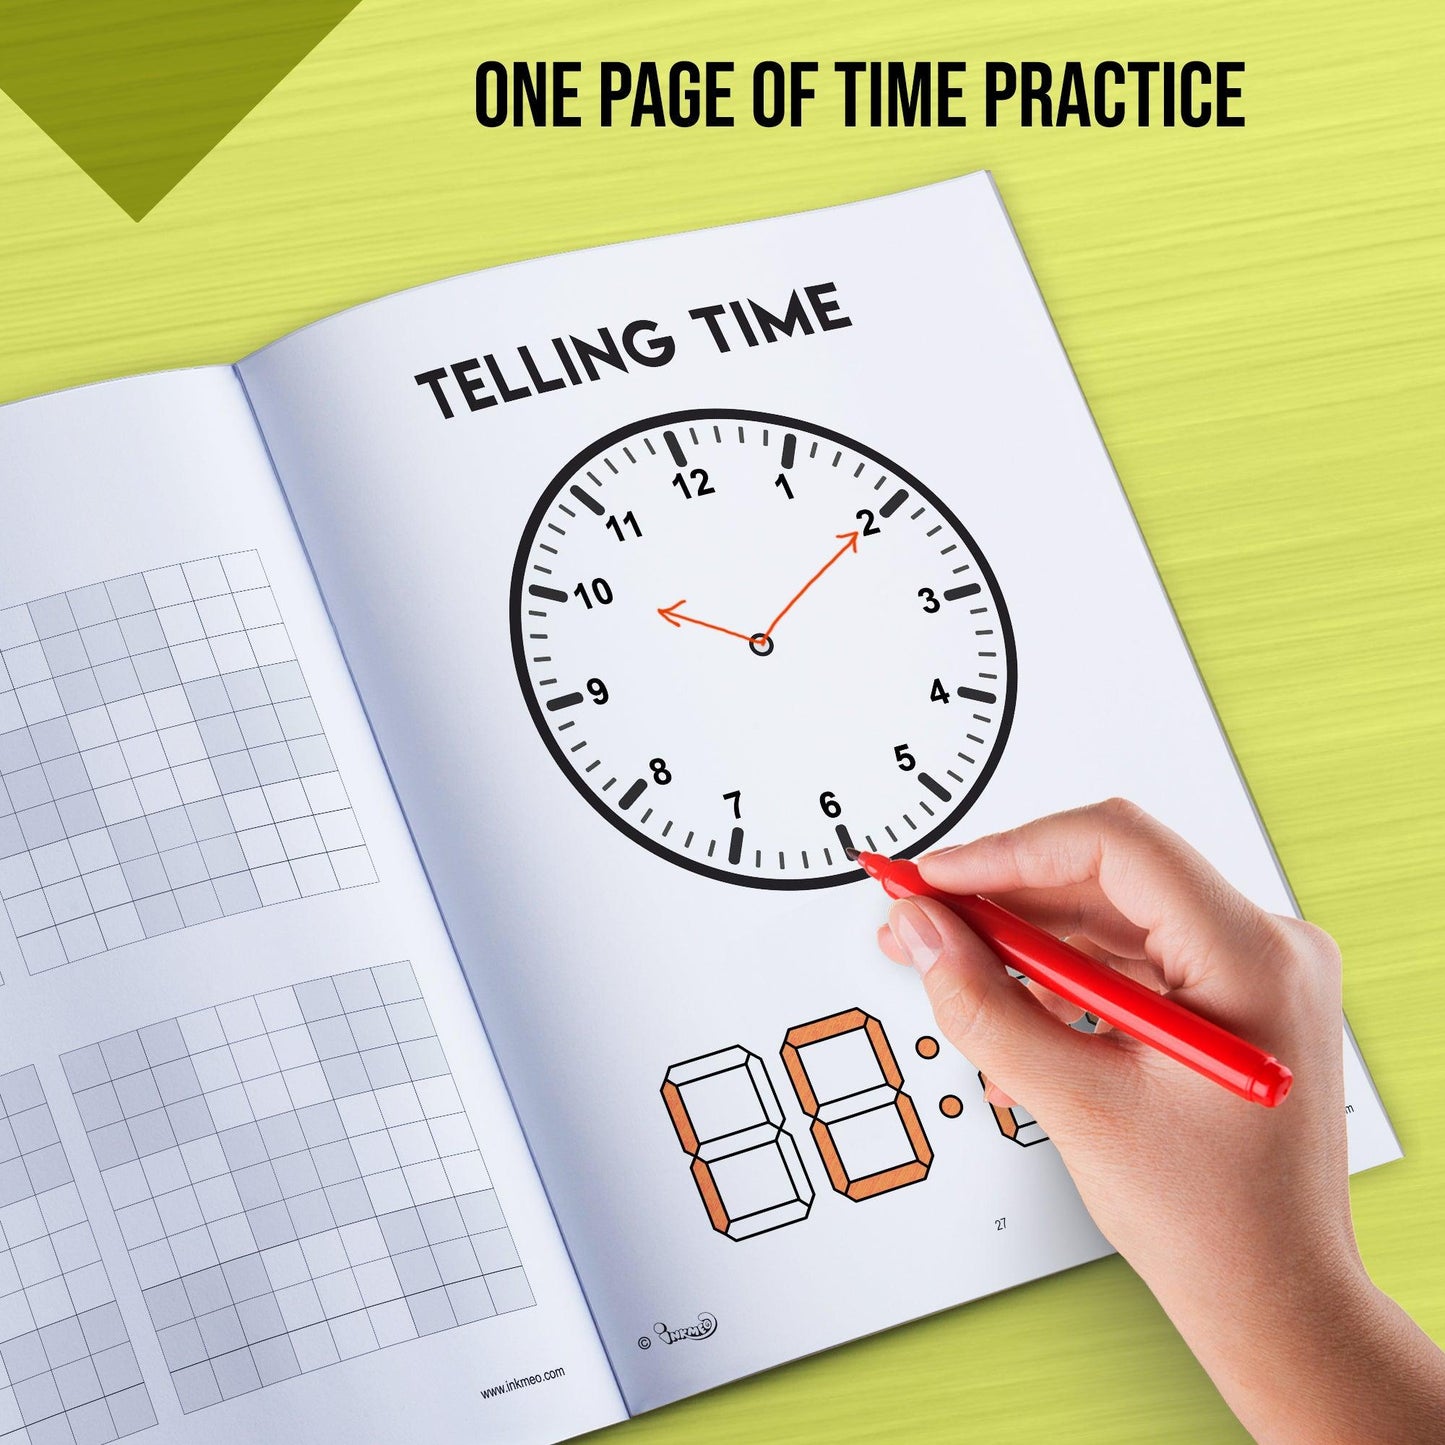 The image shows the hand practising time on the paper with caption mentioned one page of time practising